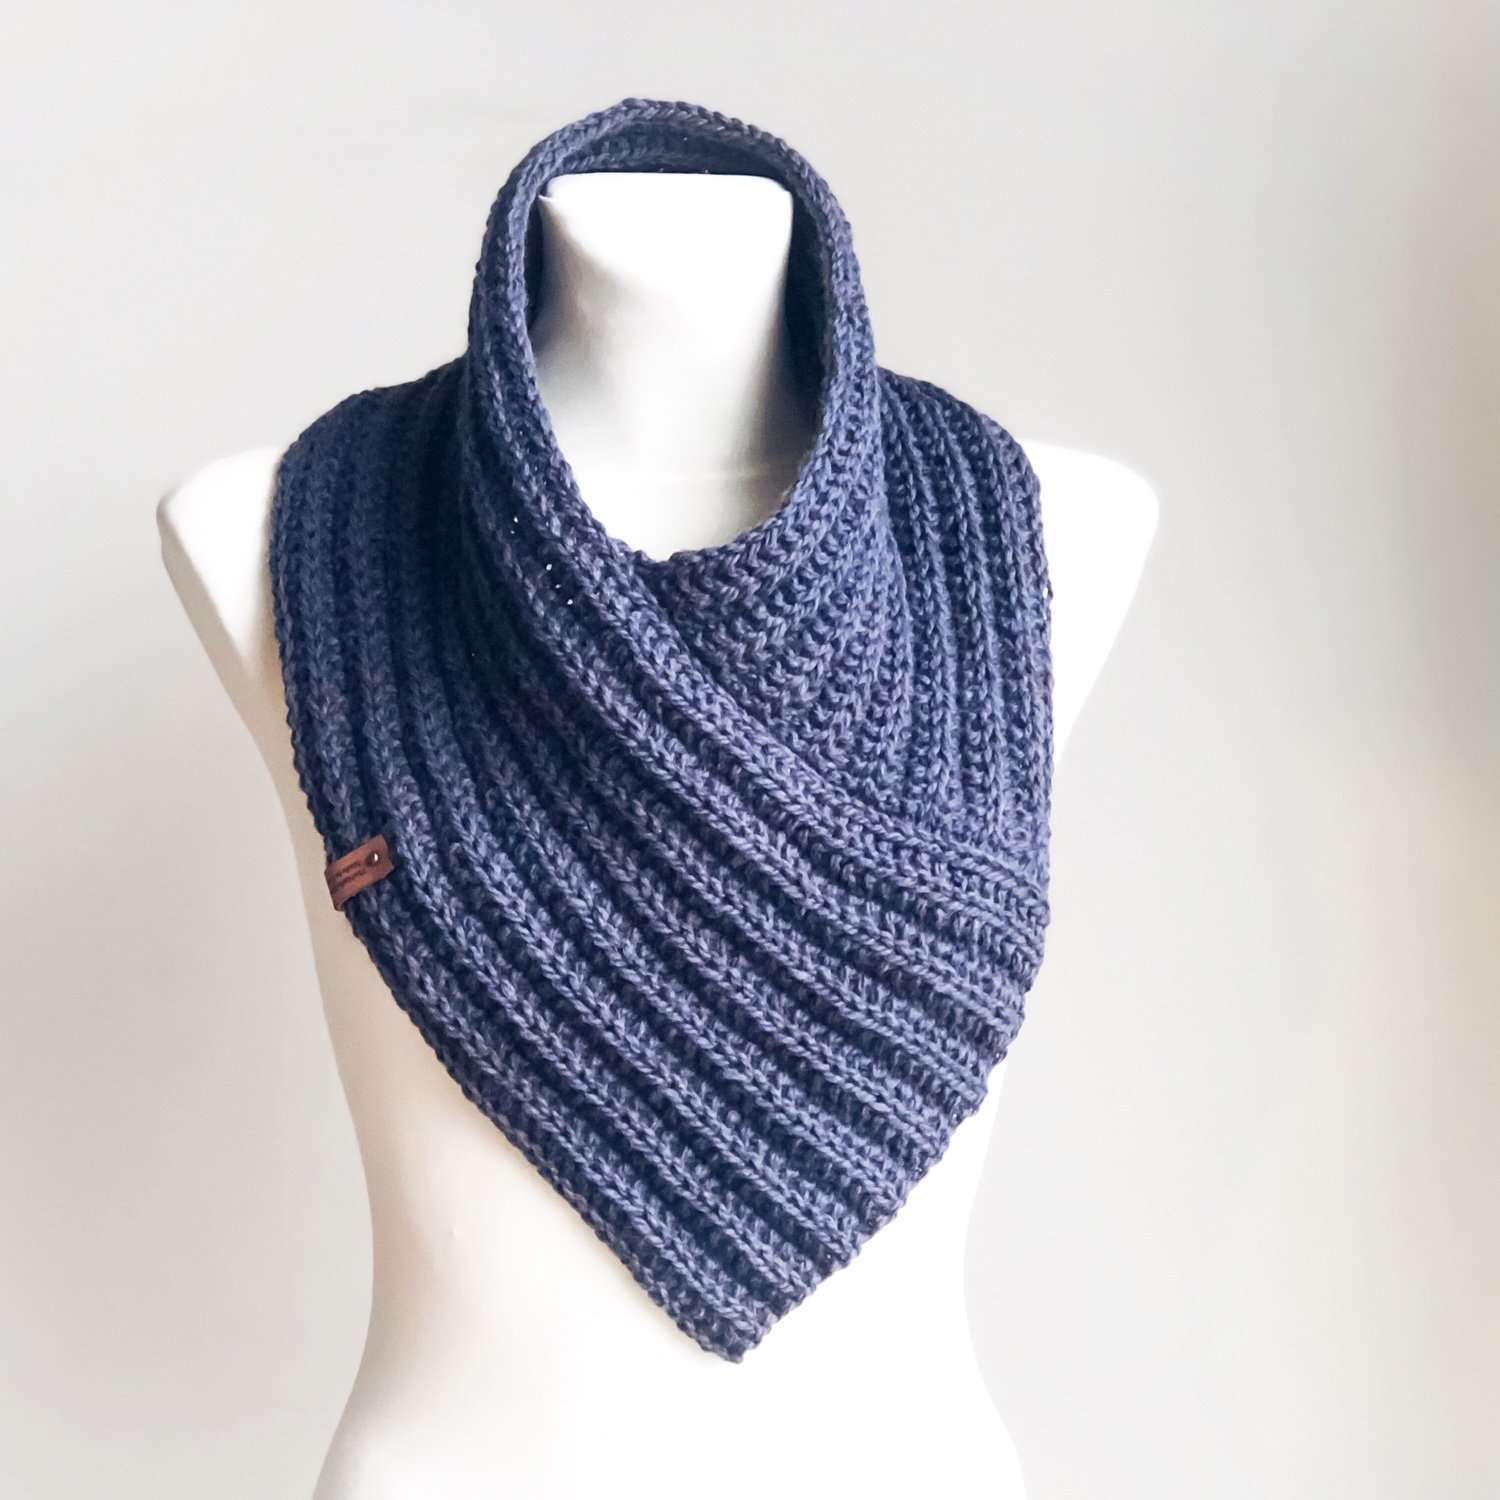 Crochet Pattern - Knit Look Marissa Cowl - TheMailoDesign - Scarves & Shawls - TheMailoDesign